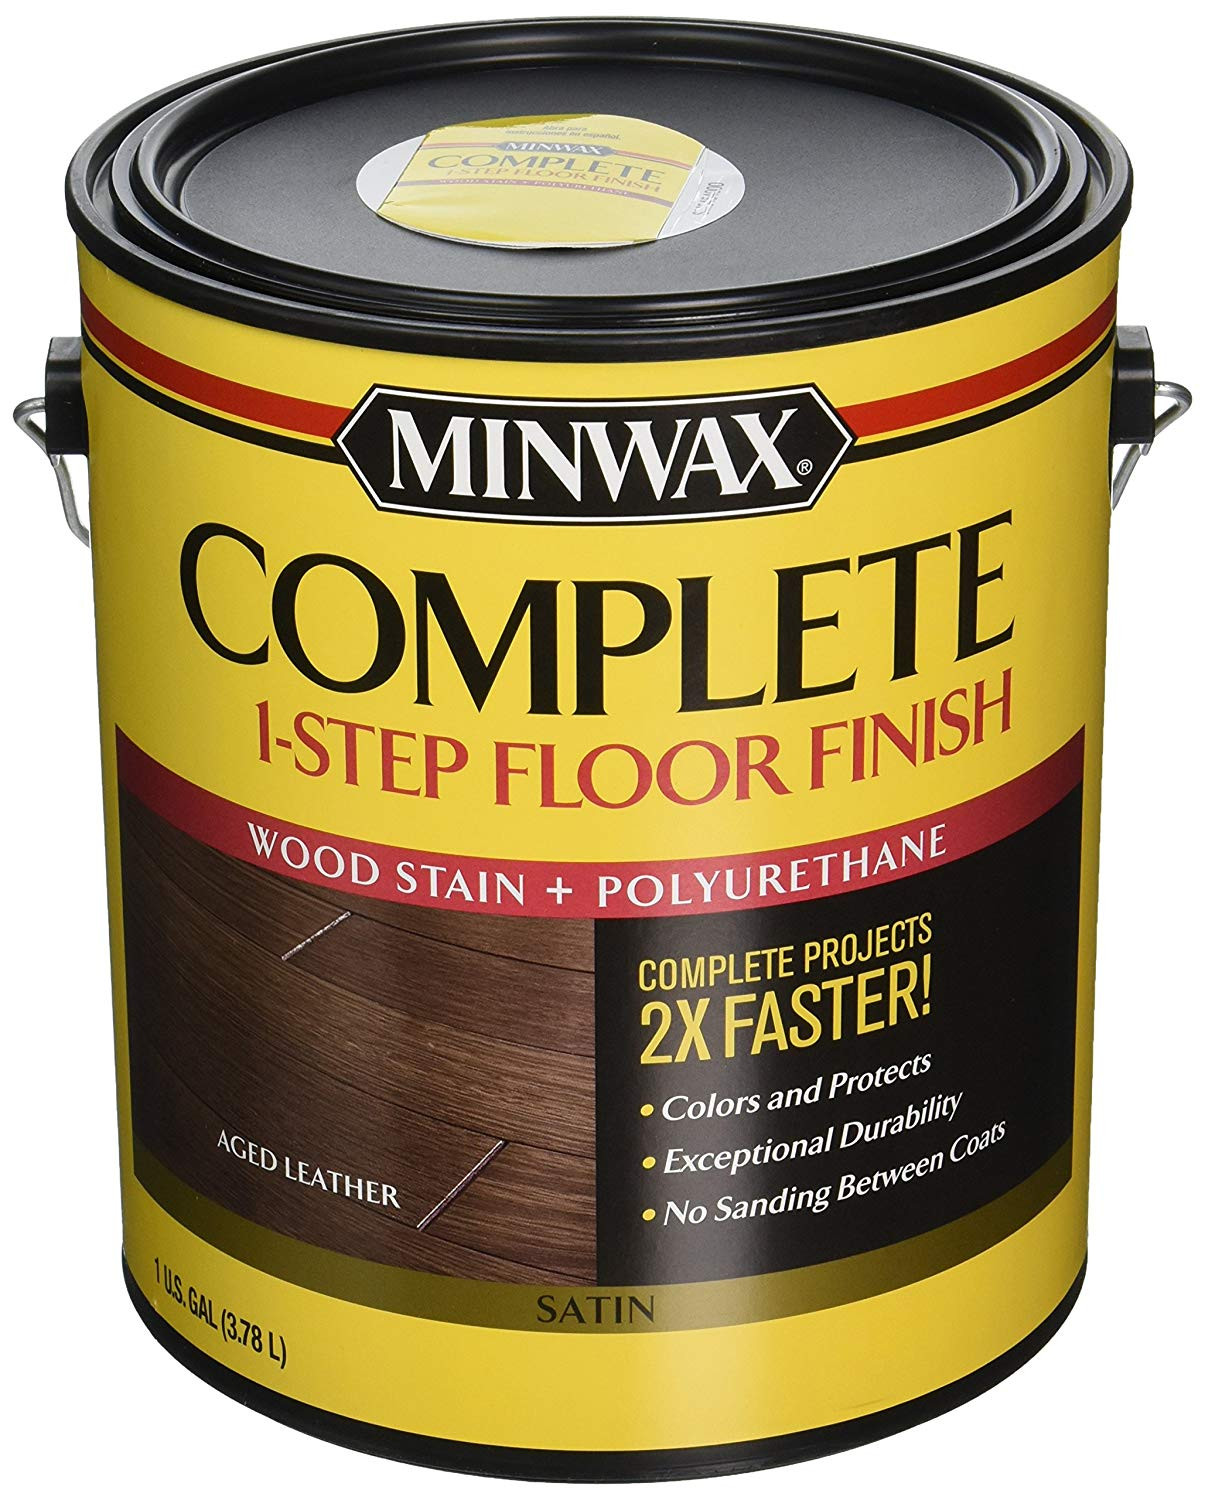 23 Cute How Expensive to Refinish Hardwood Floors 2024 free download how expensive to refinish hardwood floors of minwax 672050000 67205 1g satin aged leather complete 1 step floor for minwax 672050000 67205 1g satin aged leather complete 1 step floor finish 